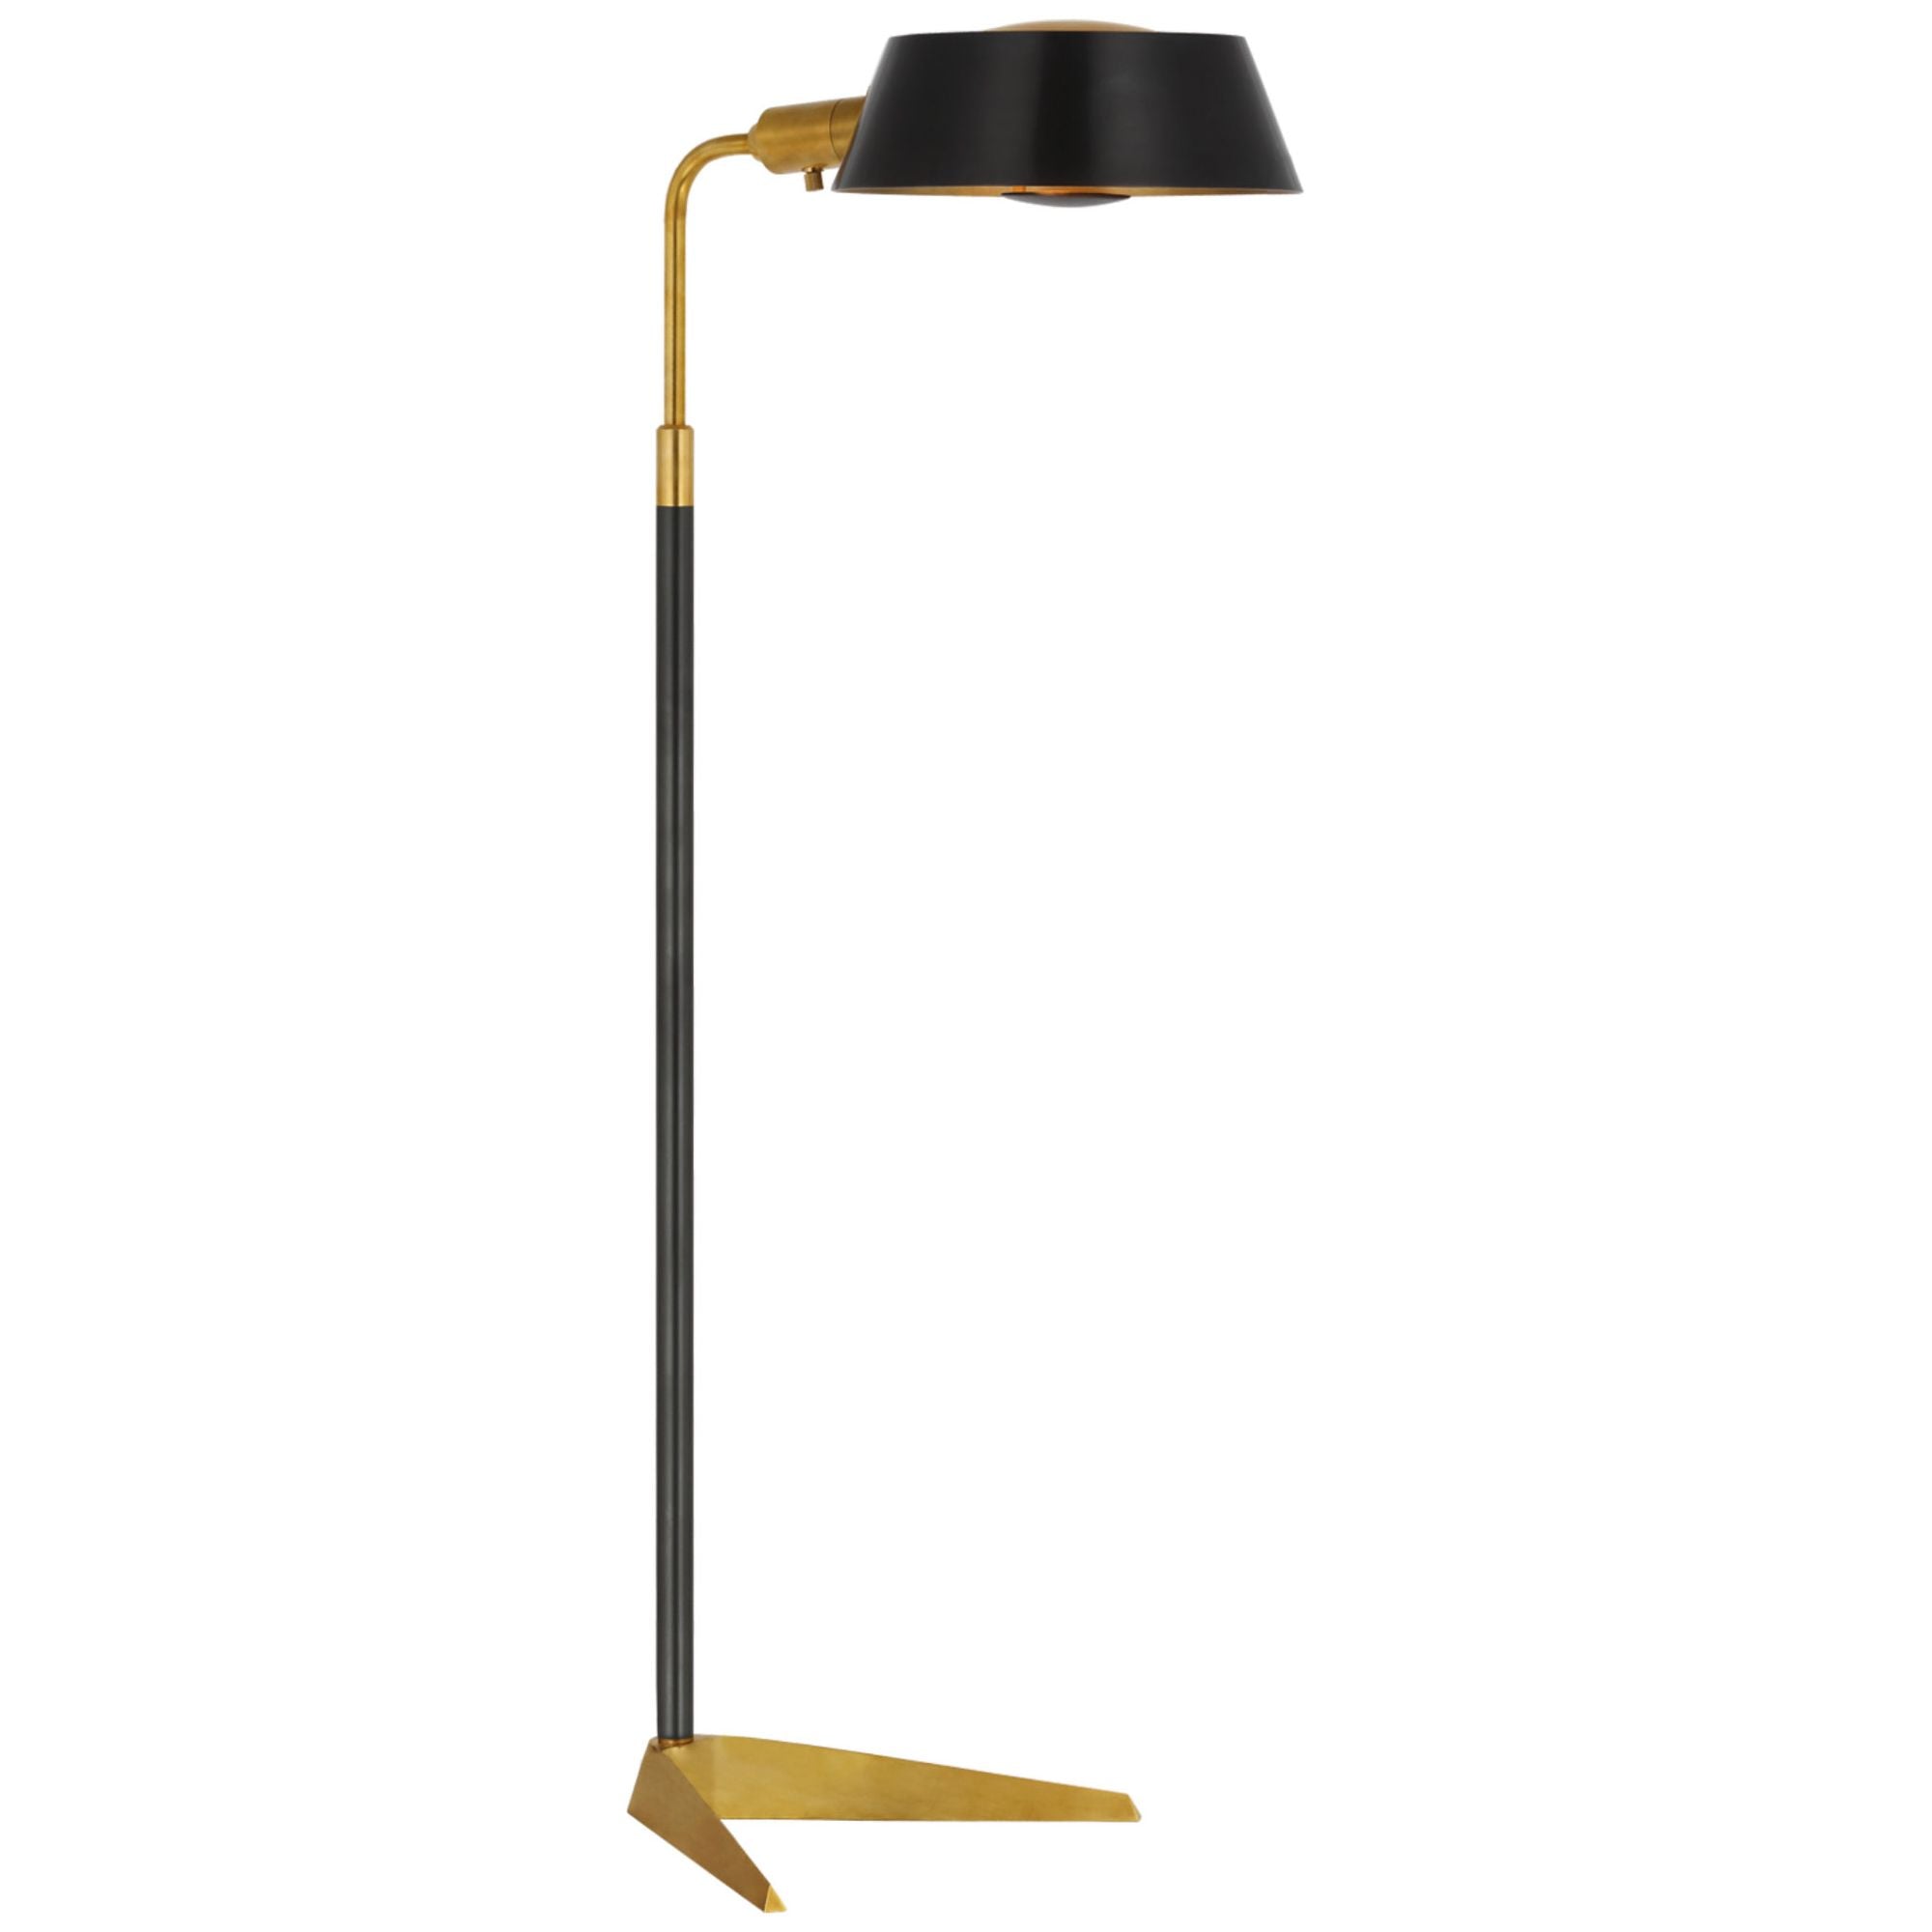 Thomas O'Brien Alfie Pharmacy Floor Lamp in Bronze and Hand-Rubbed Antique Brass